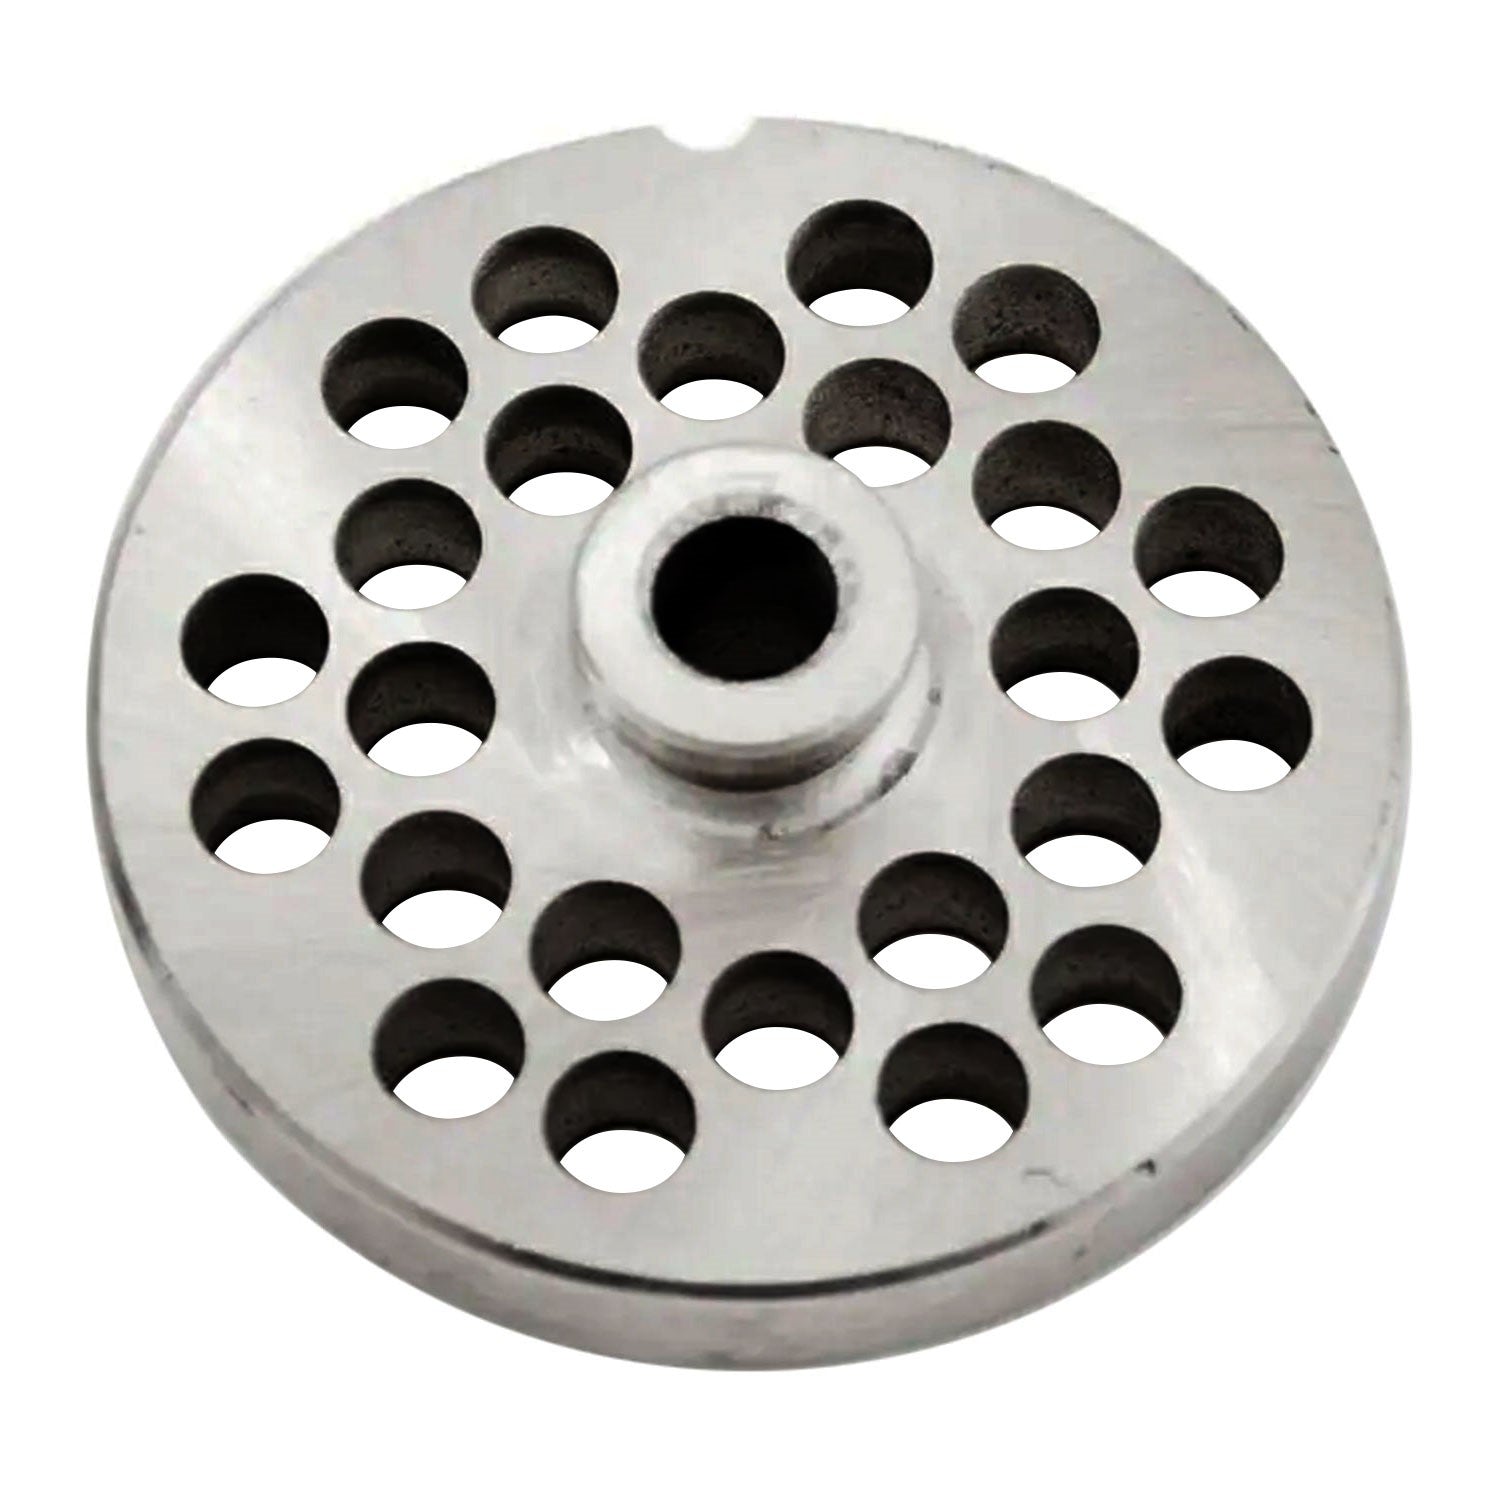 Size 22 PM Hubbed Meat Grinder Plate, 3/8